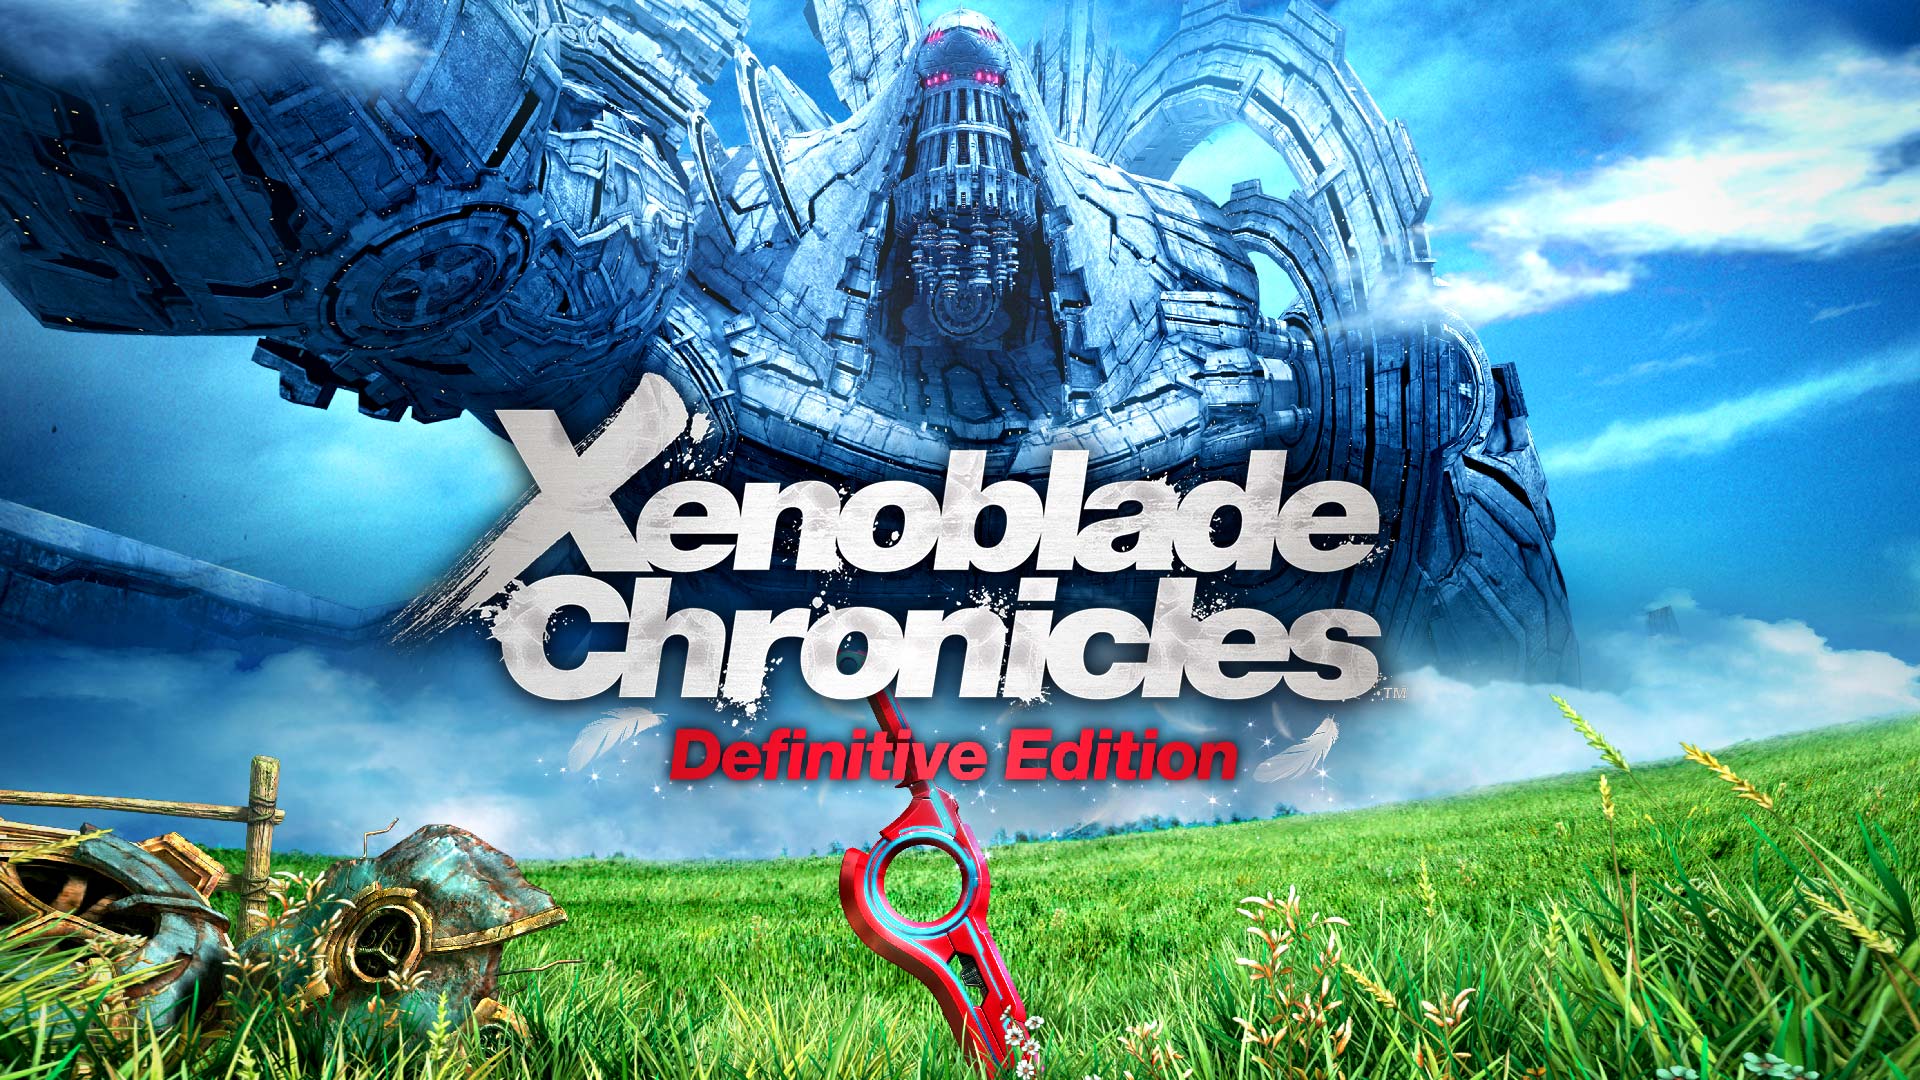 Xenoblade Chronicles Definitive Edition – Opening